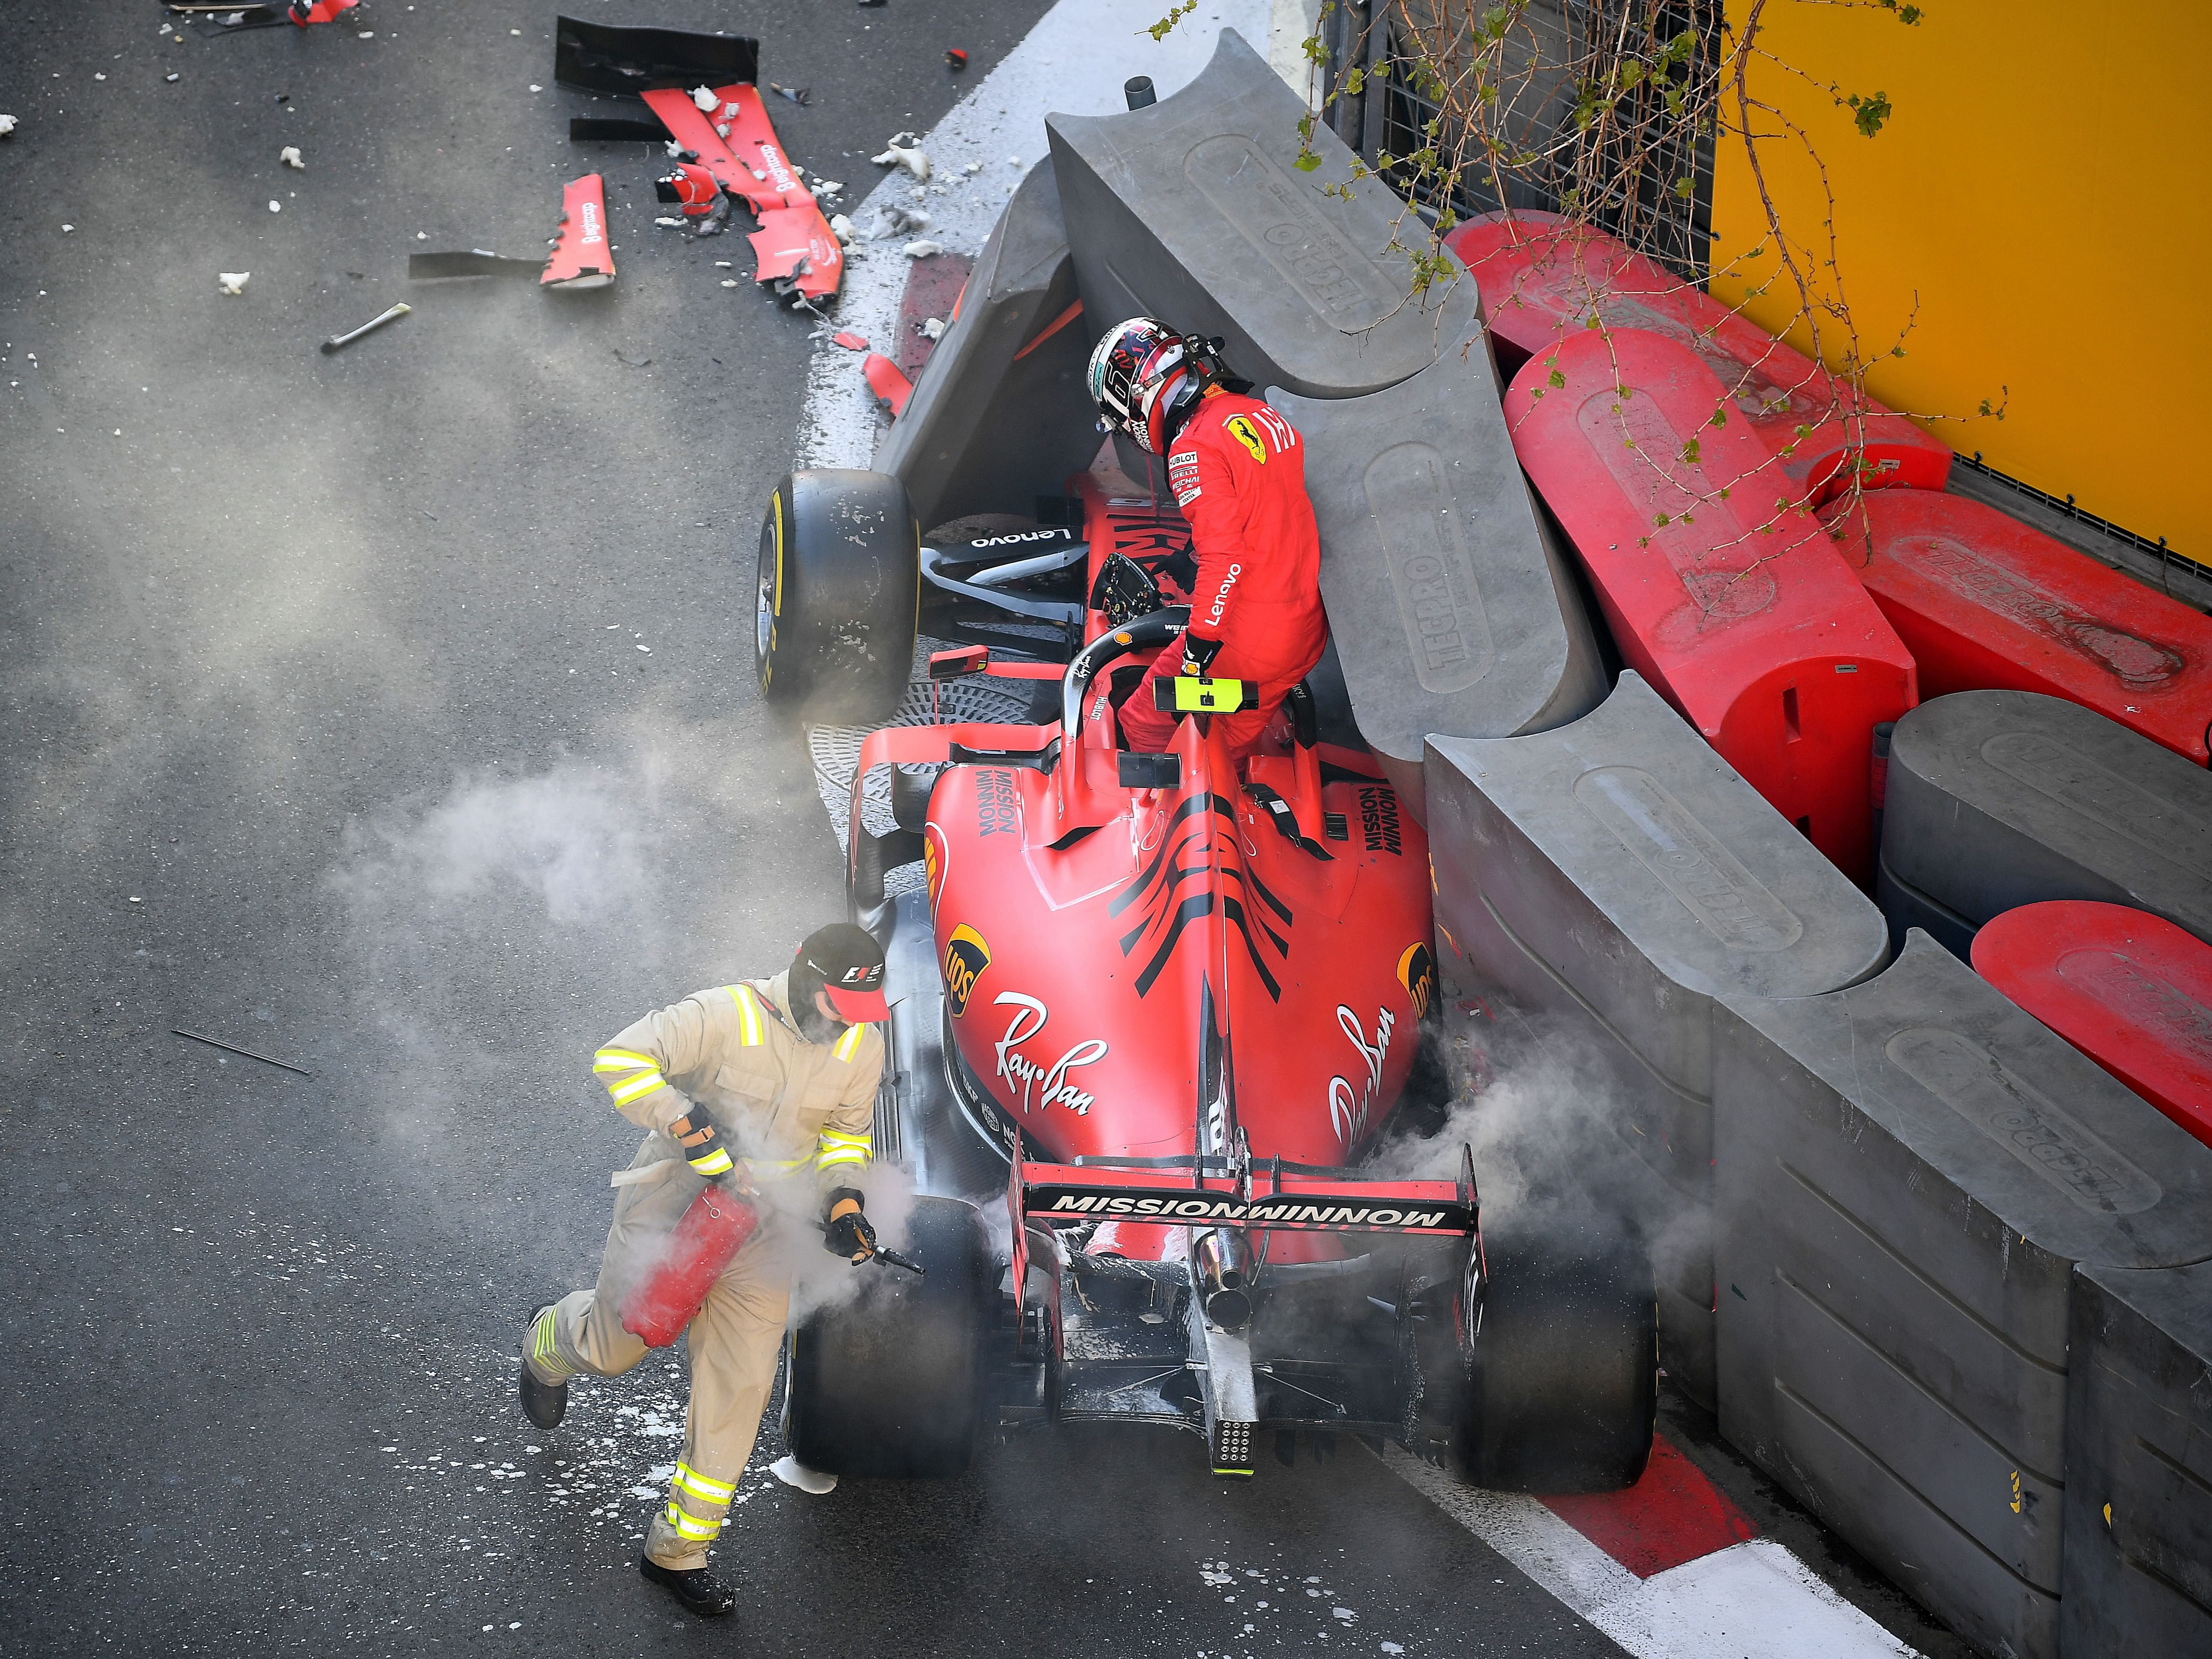 Charles Leclerc climbs from his car after crashing during qualifying for the 2019 F1 Azerbaijan Grand Prix. (Photo by Clive Mason/Getty Images)